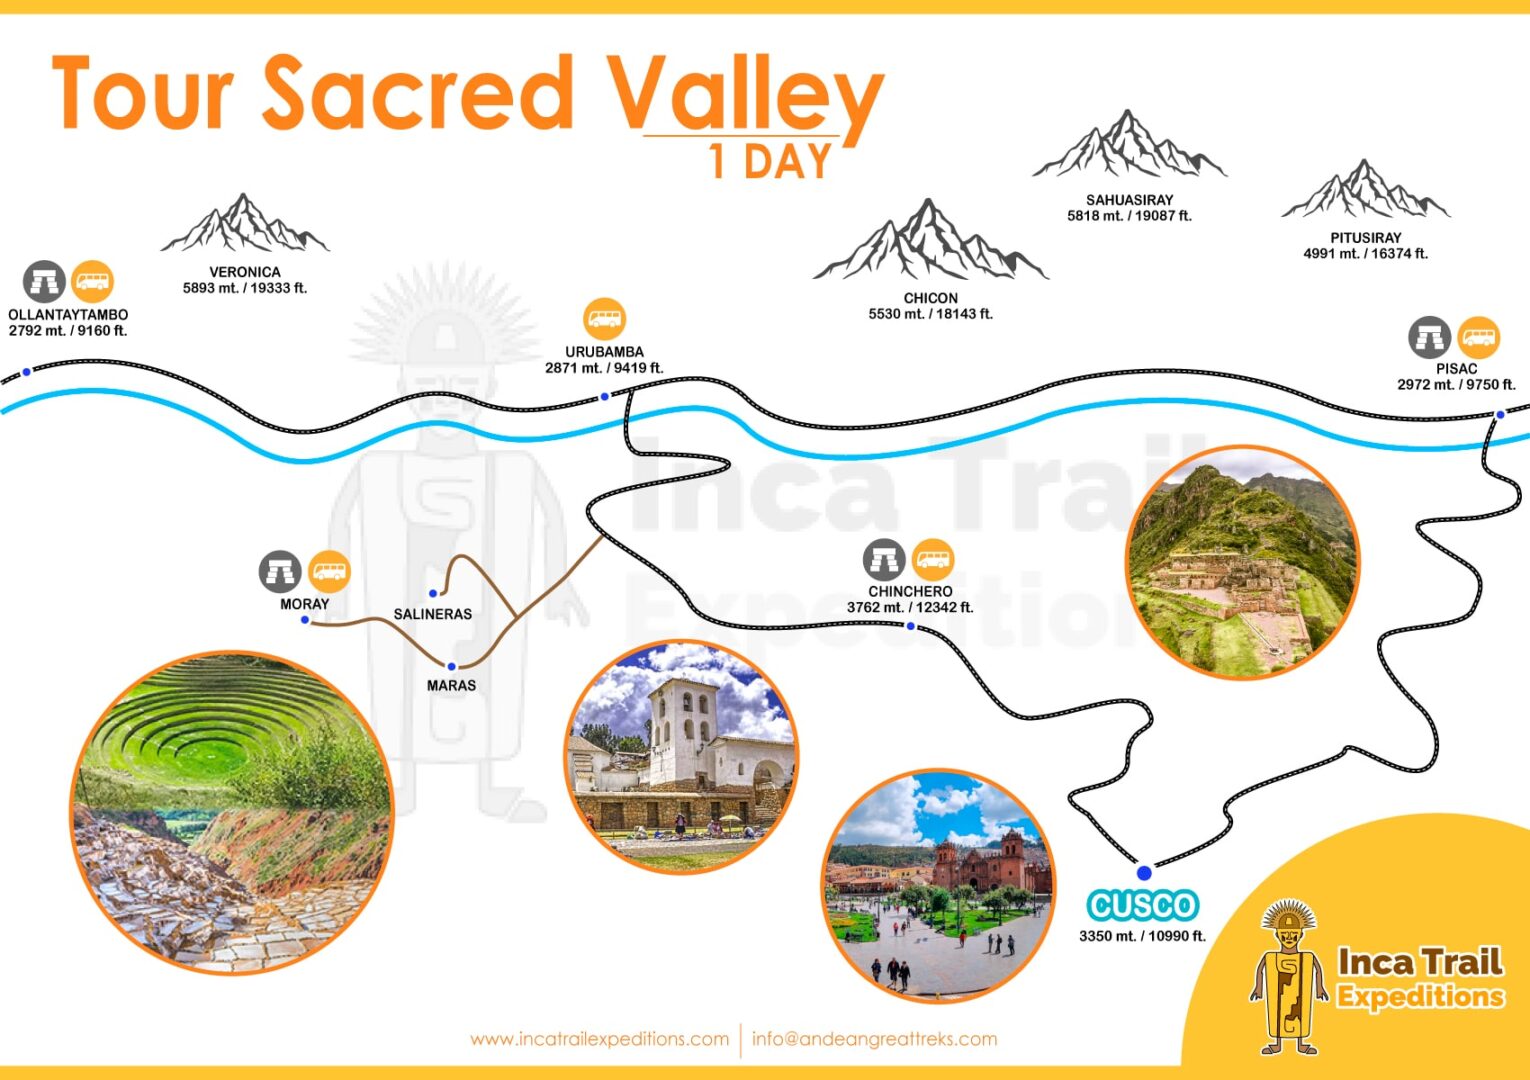 Tour Sacred Valley of Incas 1 Day